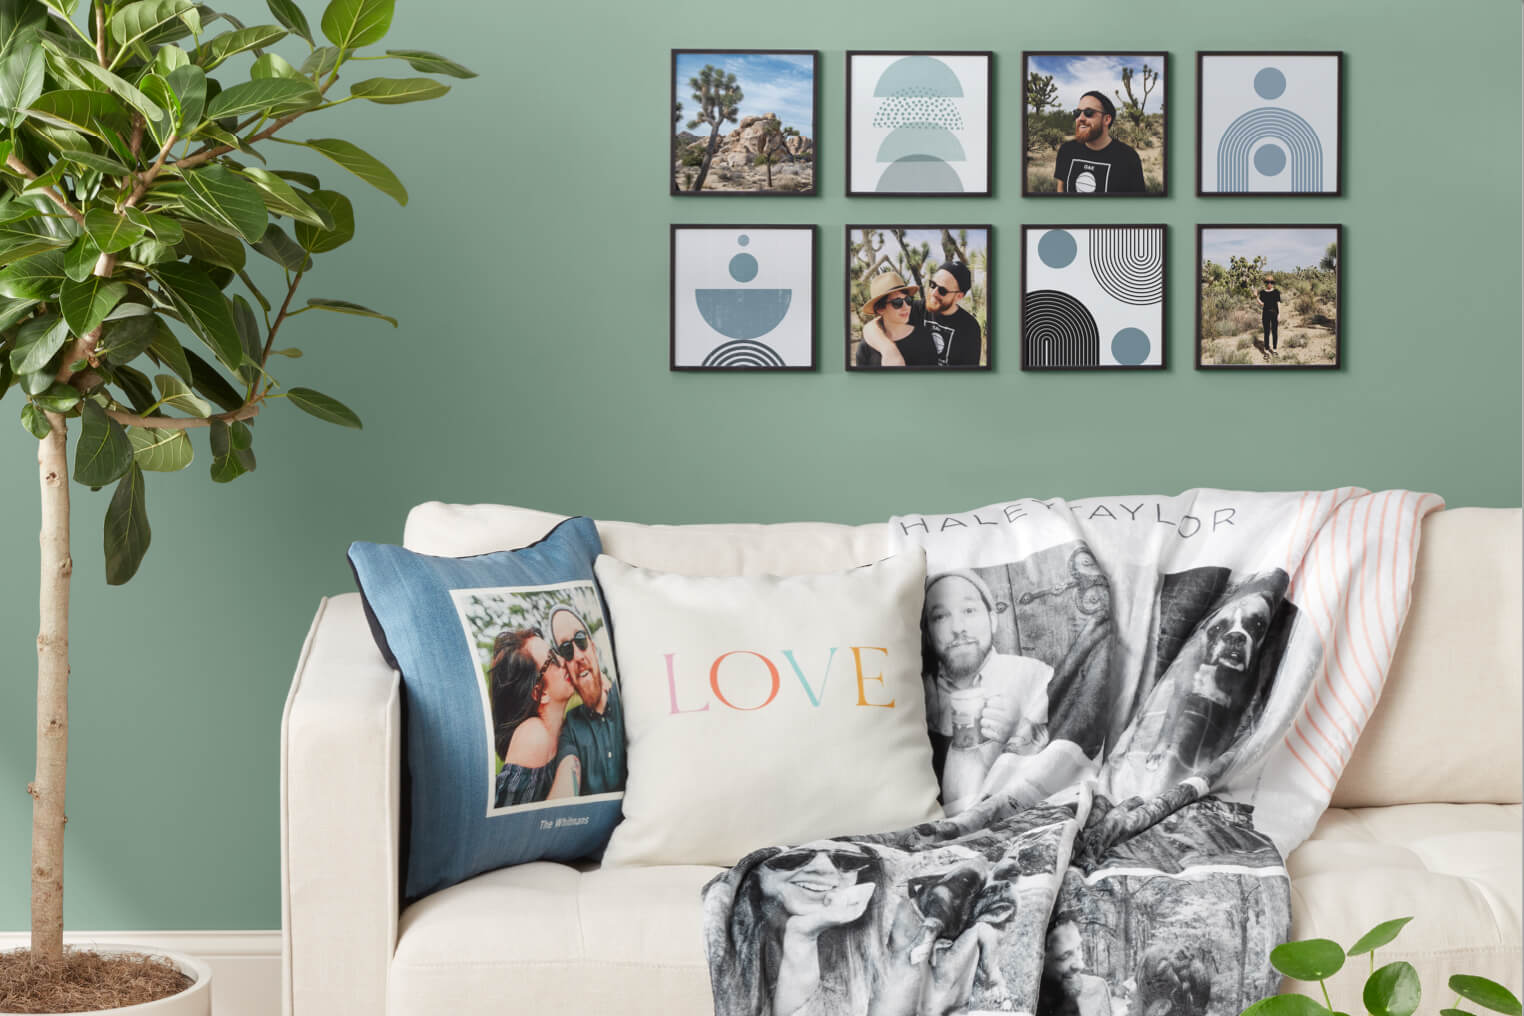 Shutterfly: Refresh your home for the new year with up to 50% off sitewide